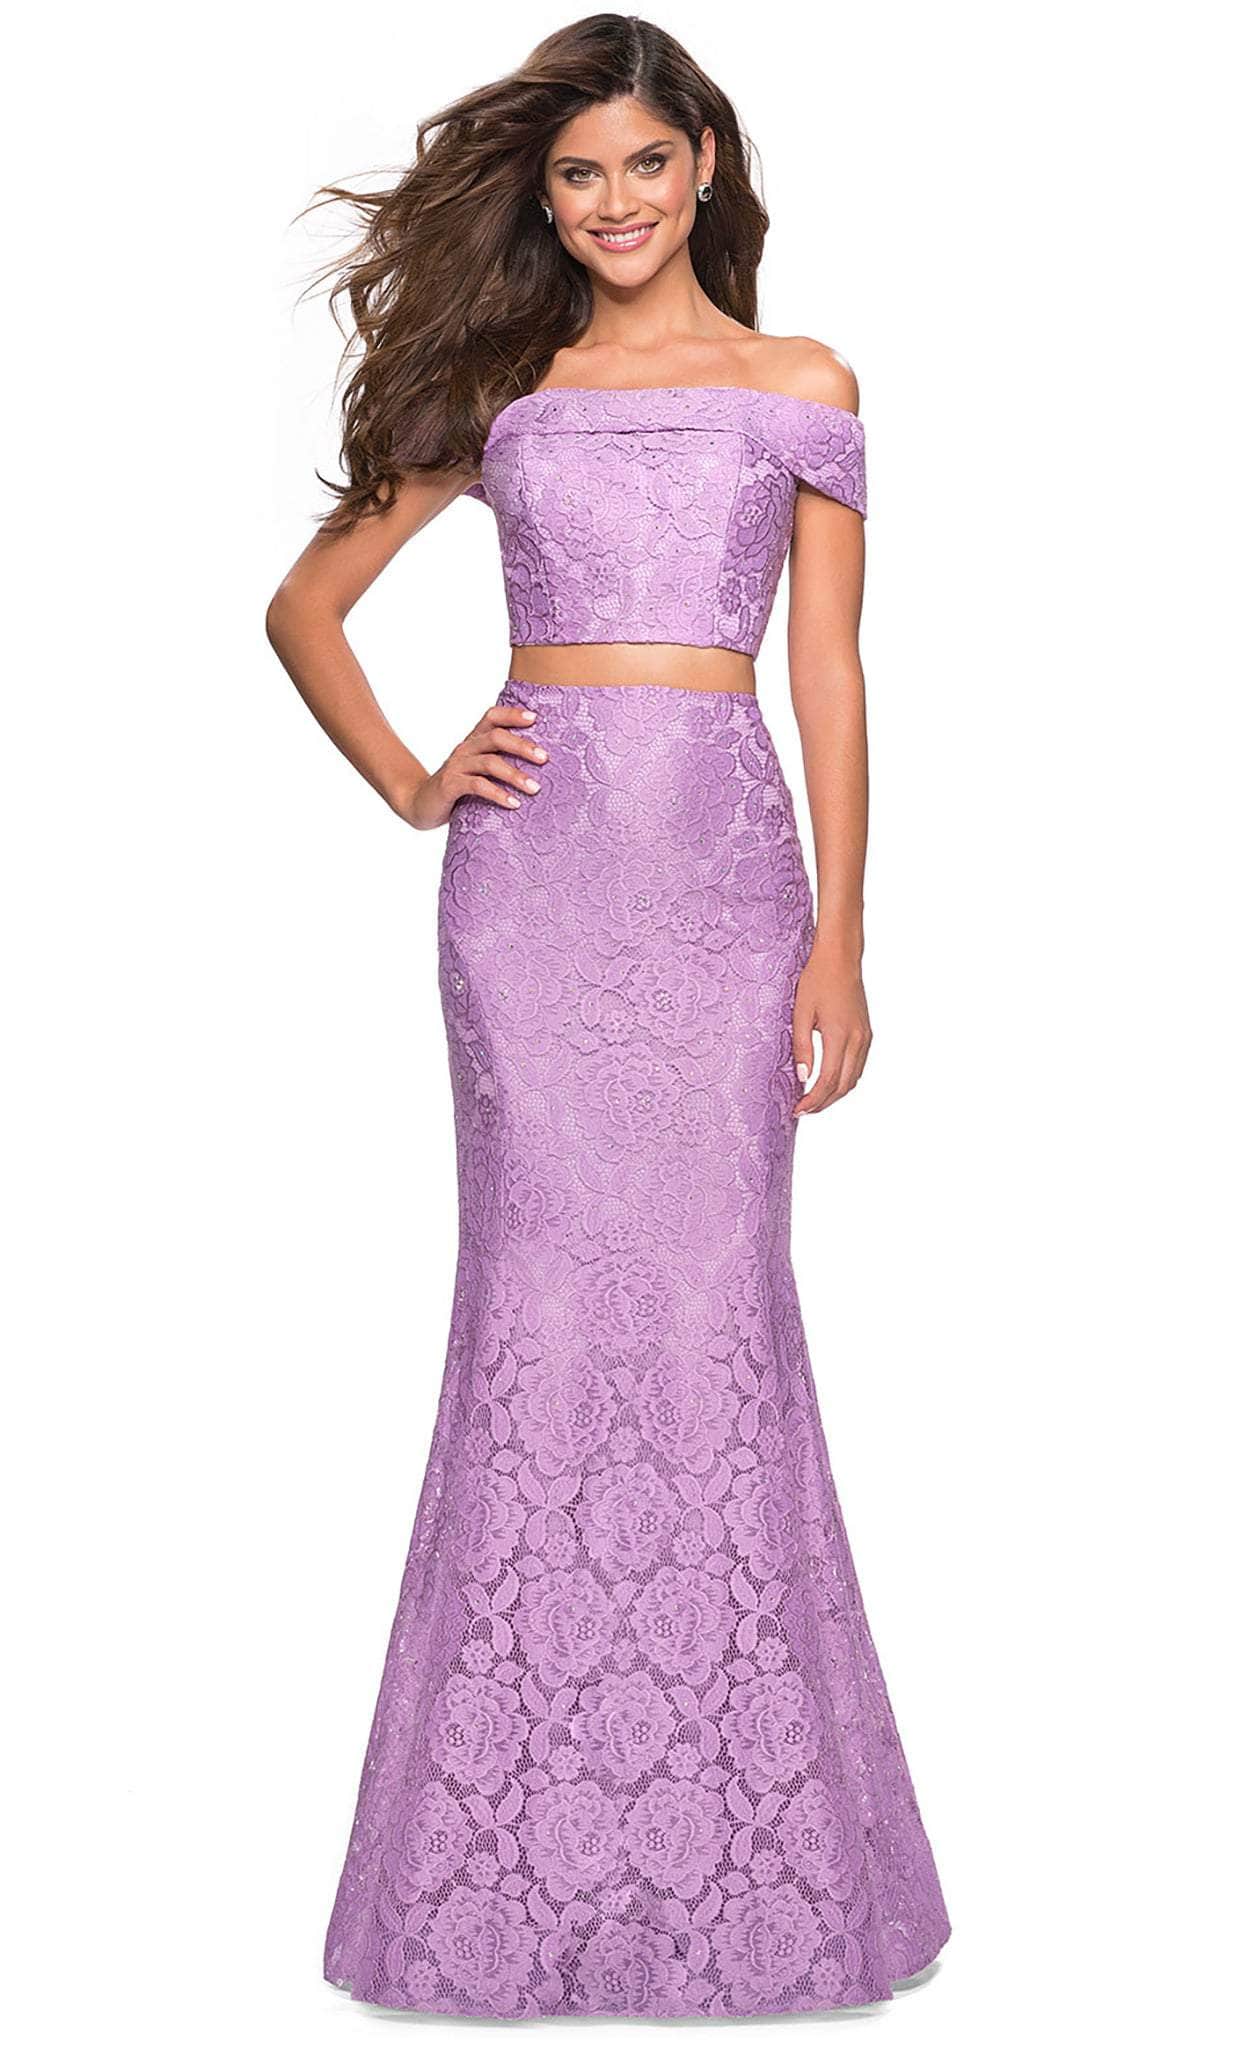 La Femme - 27443 Two-Piece Allover Lace Off Shoulder Mermaid Gown Formal Gowns 00 / Lavender